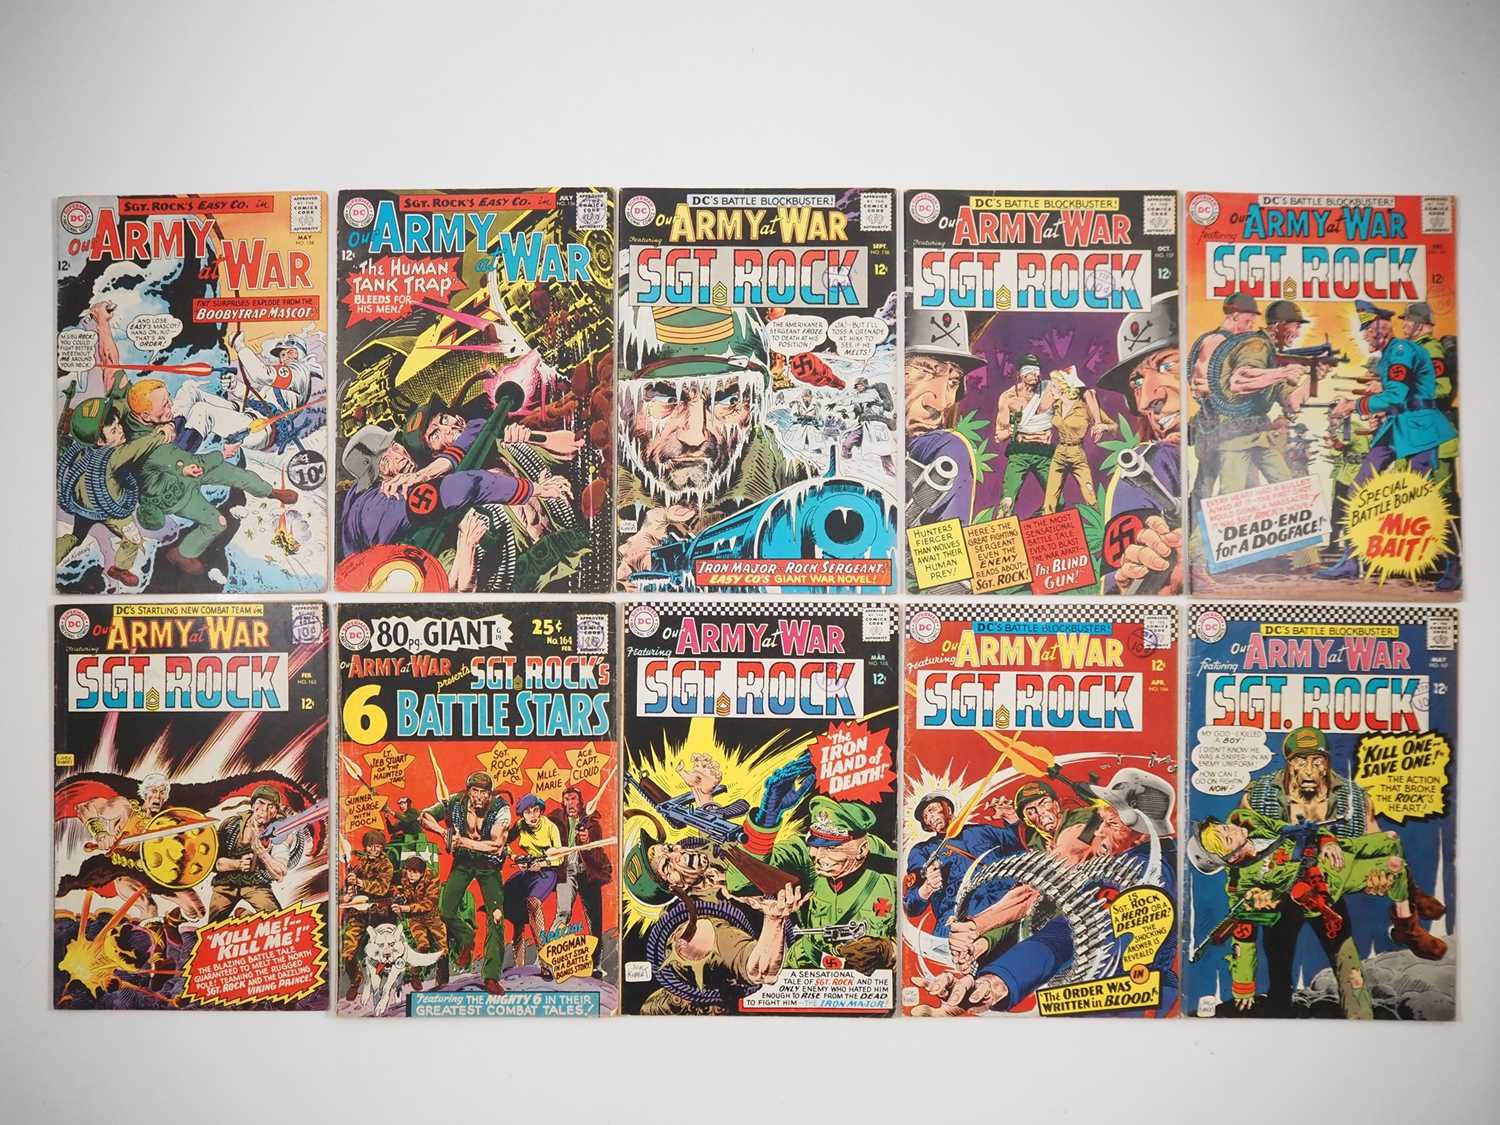 OUR ARMY AT WAR #154, 156, 158, 159, 161, 163, 164, 165, 166, 167 (10 in Lot) - (1965/1966 - DC) -